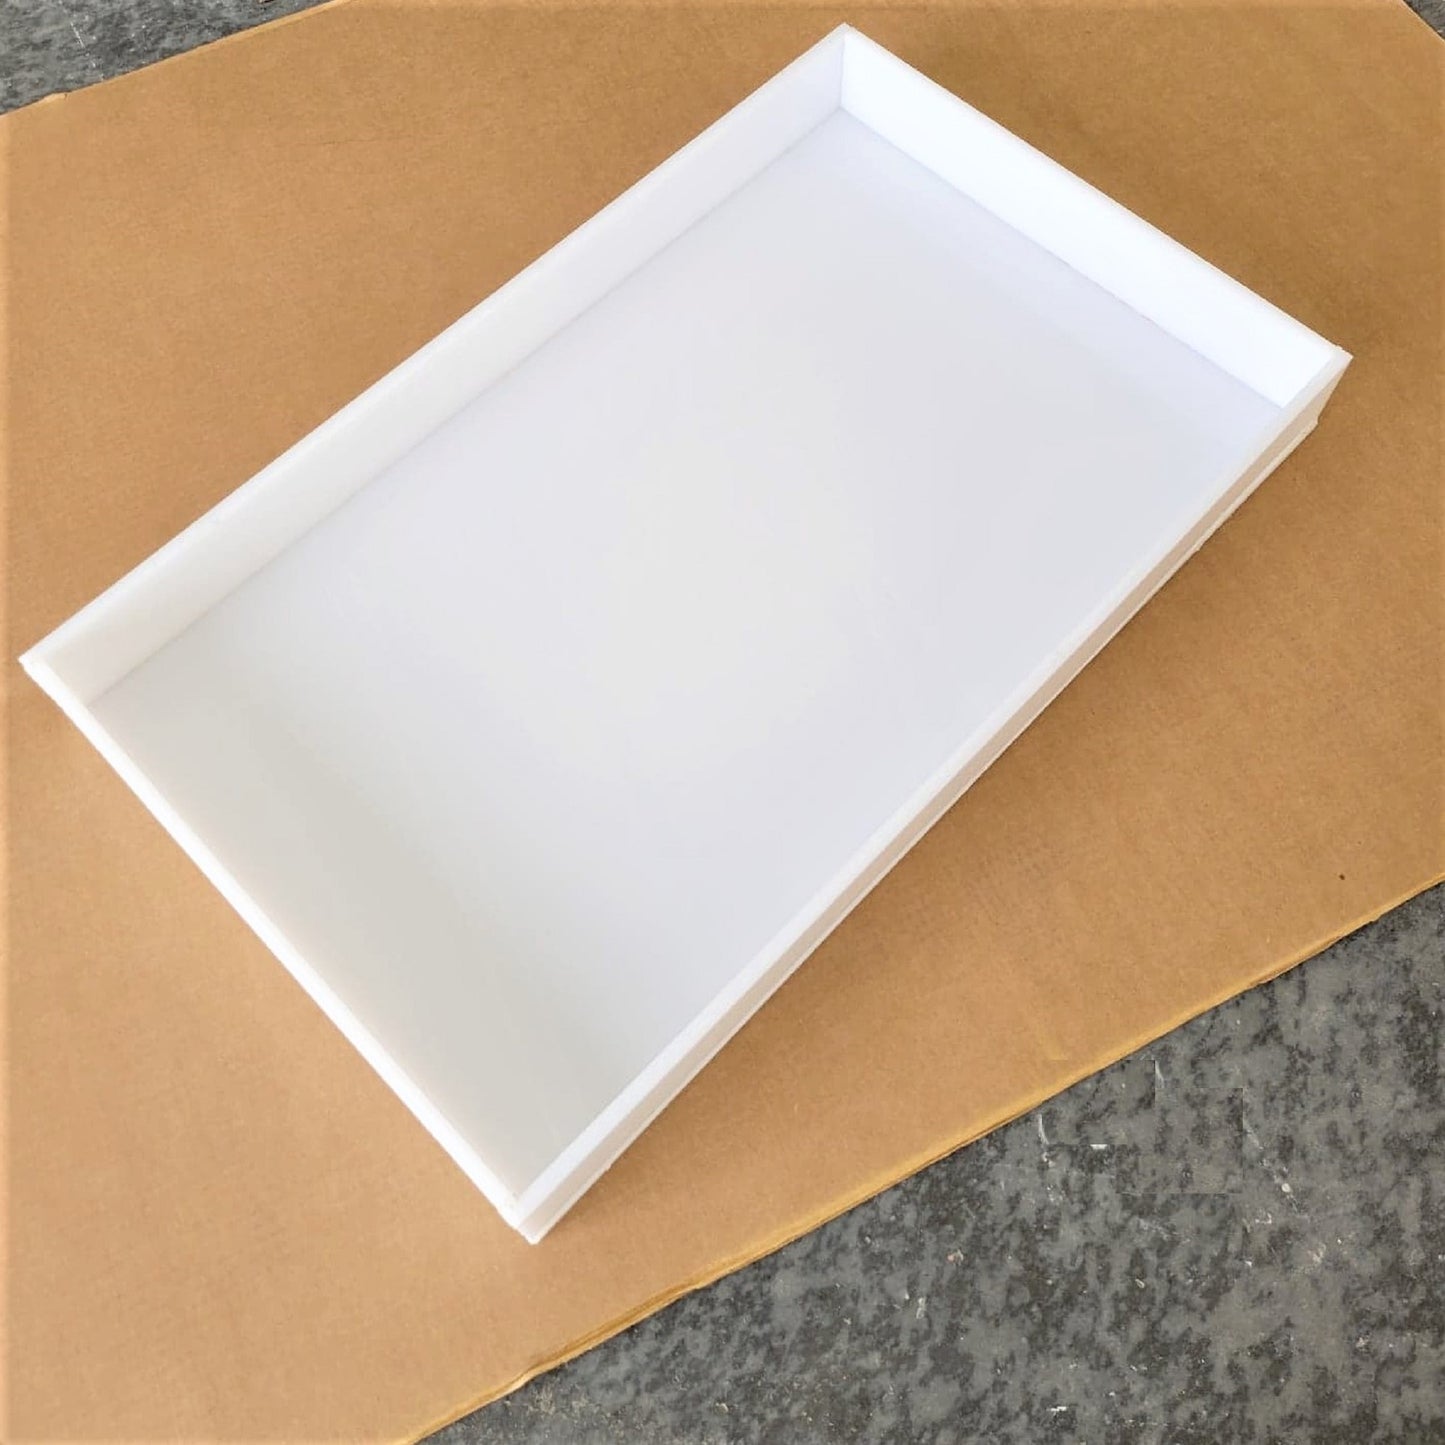 HDPE Molds, HDPE Forms, Silicon Mold, Epoxy Resin Mold, Resin Mold, Epoxy Mold, Large Mold, Charcuterie Board Mold, Silicone Forms, Resin Forms, Epoxy Forms, Epoxy Resin Forms, Crafted Elements